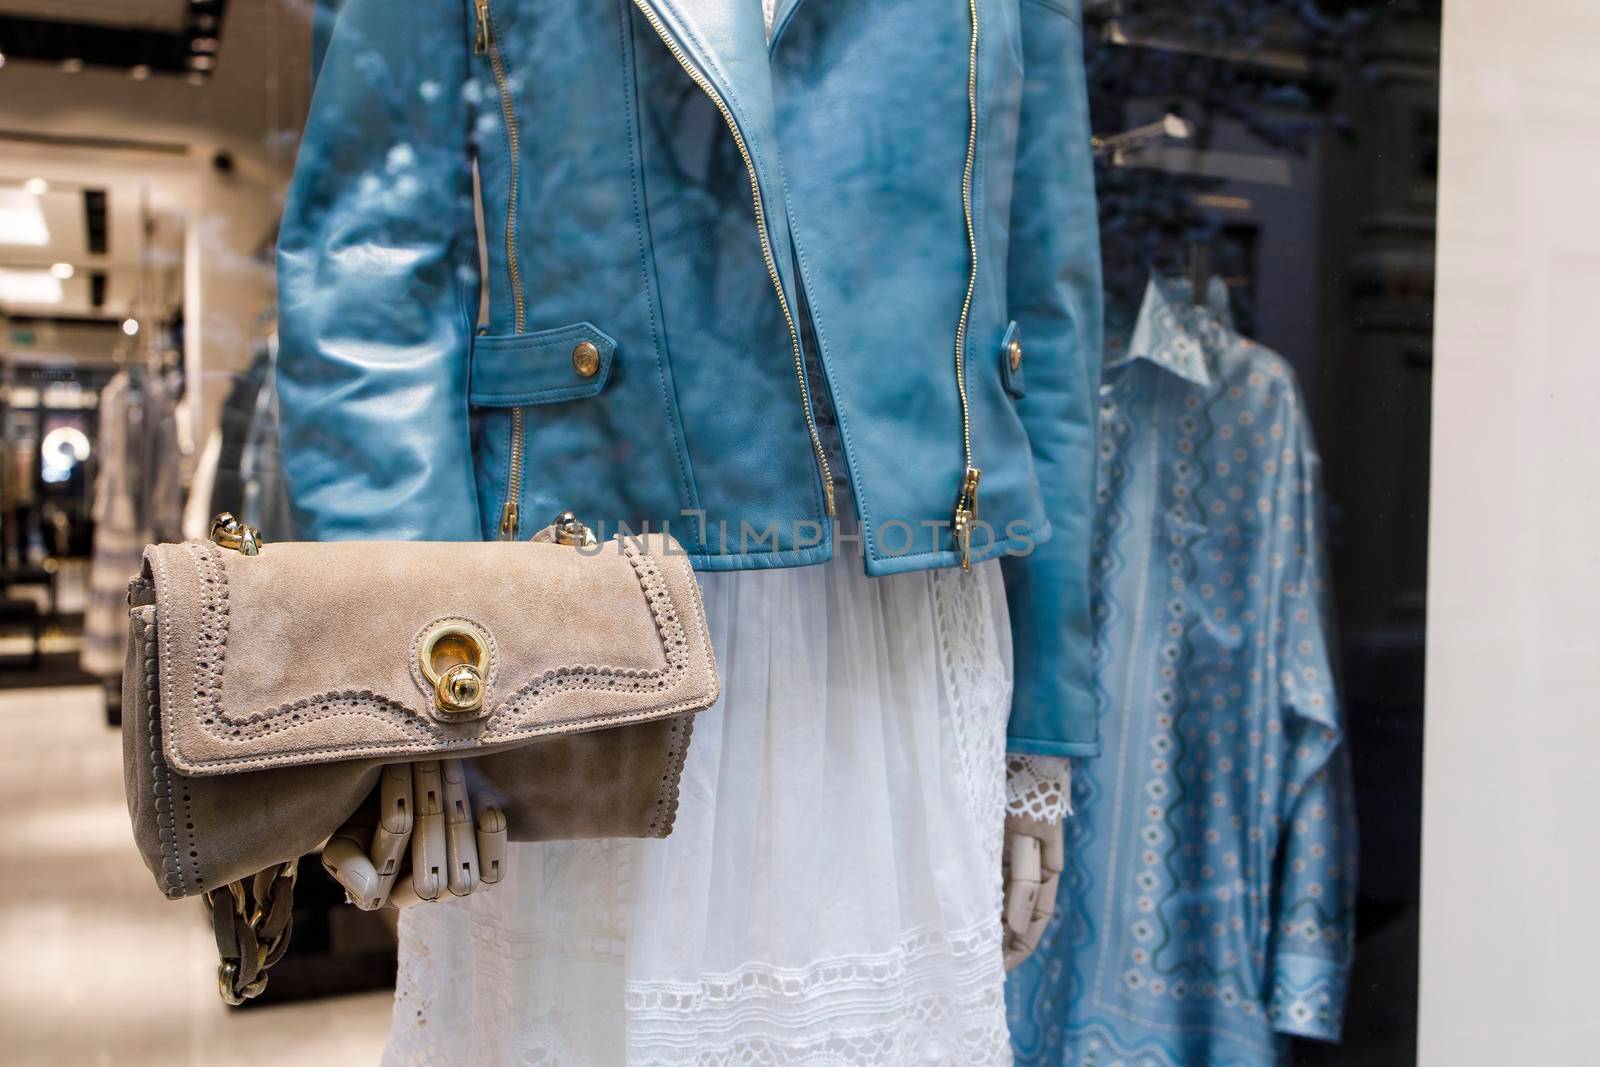 Moscow, Russia - 14 April, 2022, A mannequin in a blue leather jacket holds a beige suede clutch bag with gold fittings in a shop window